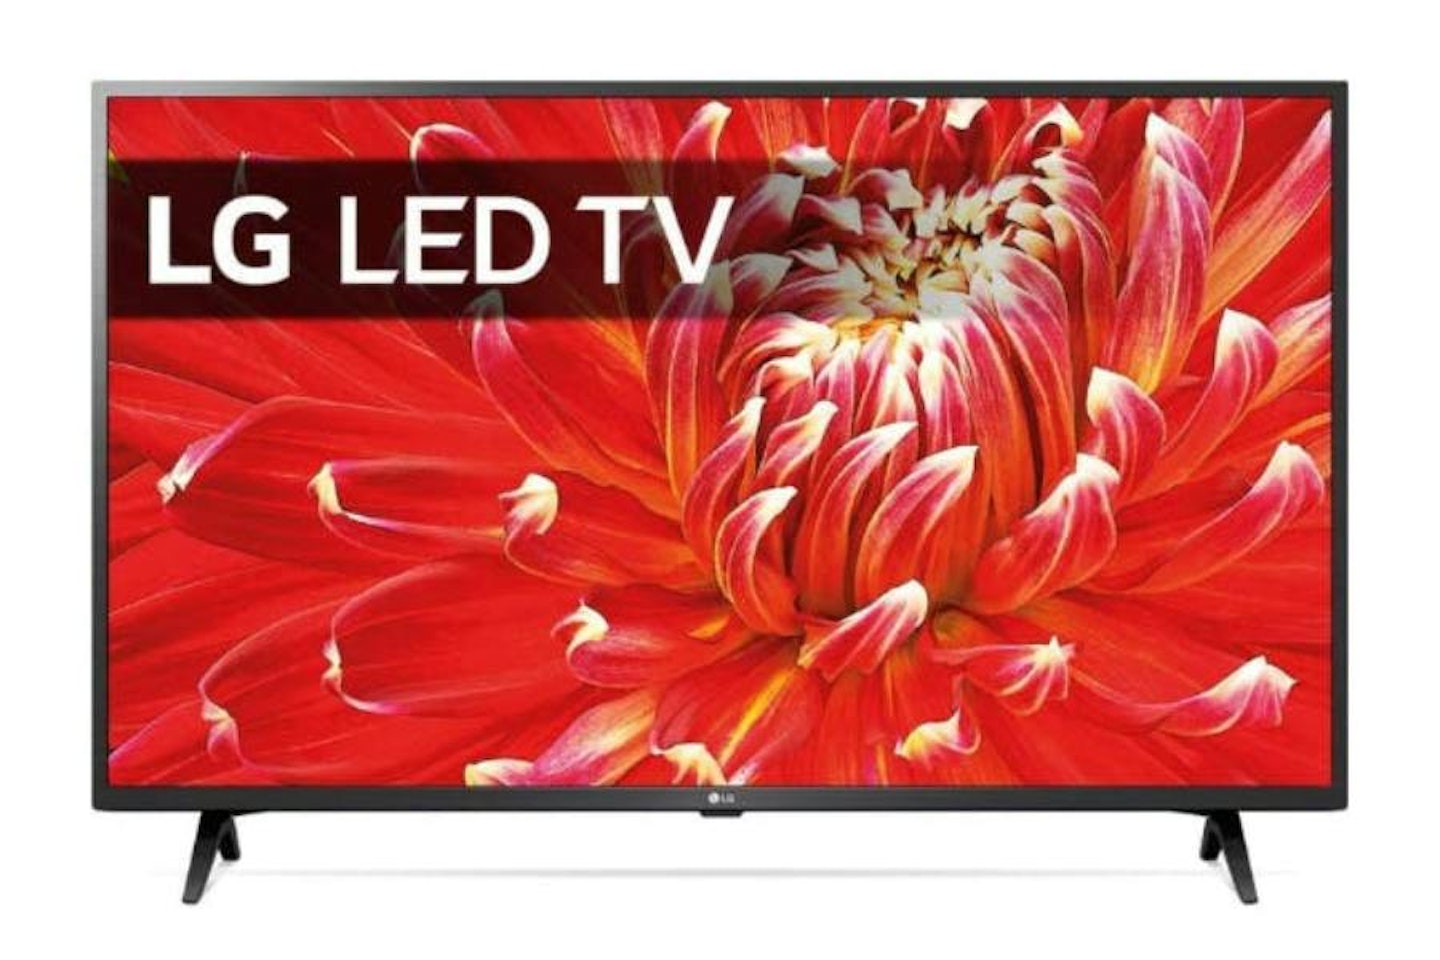 LG 32LM6300 - one of the best 32" tvs